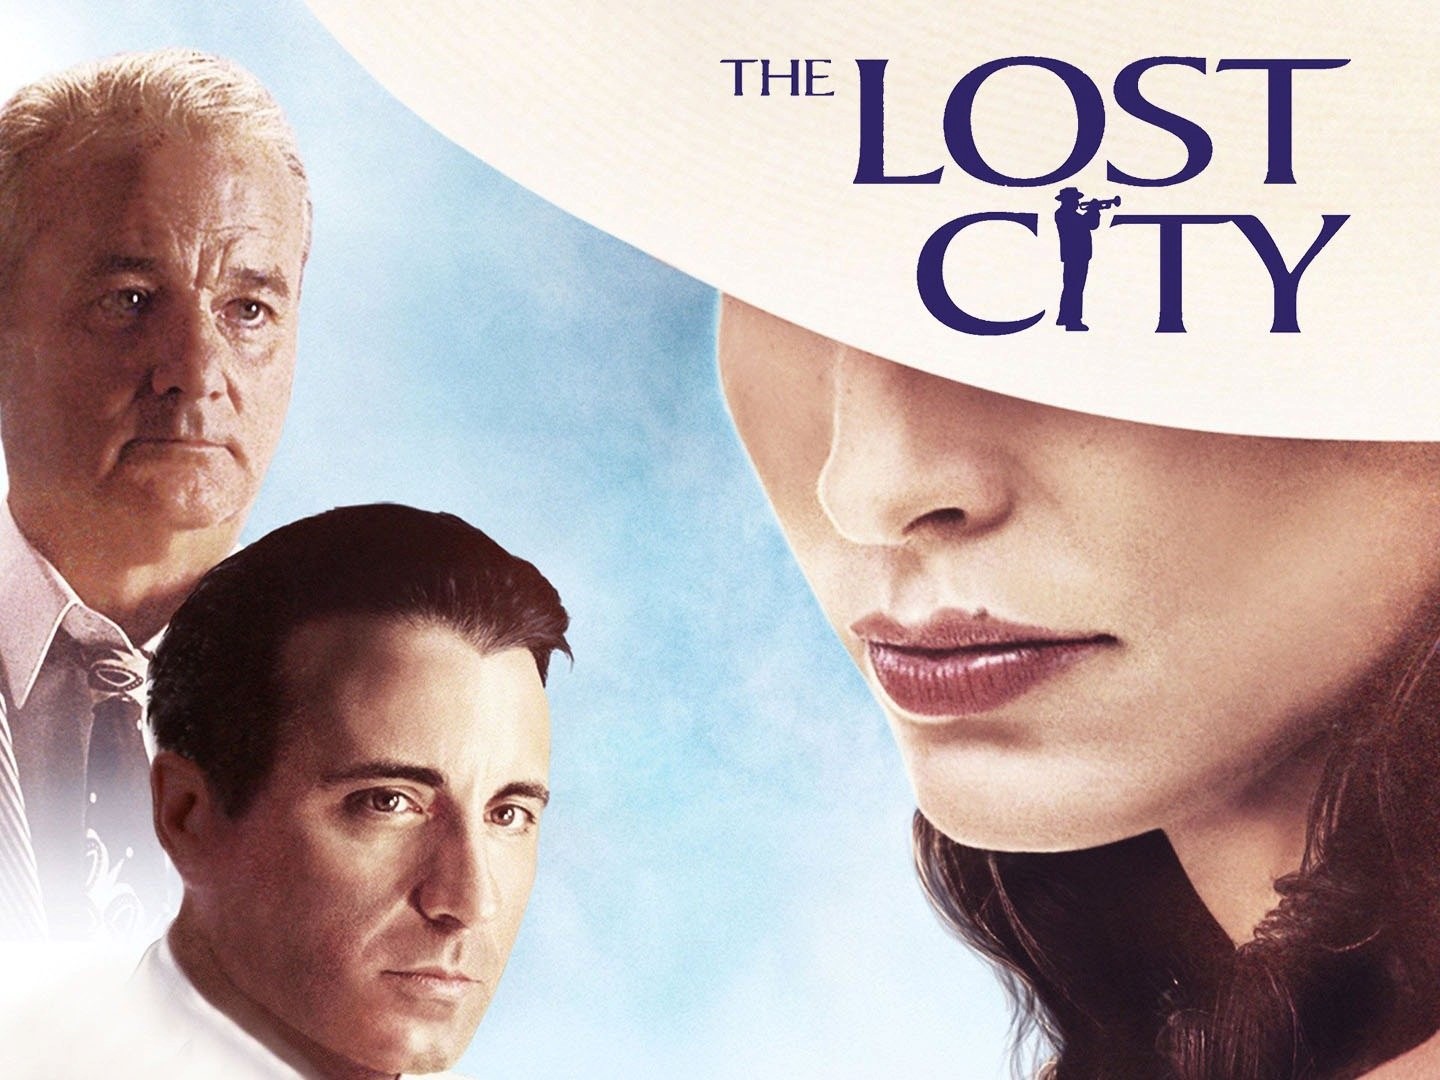 The Lost City (2005) 